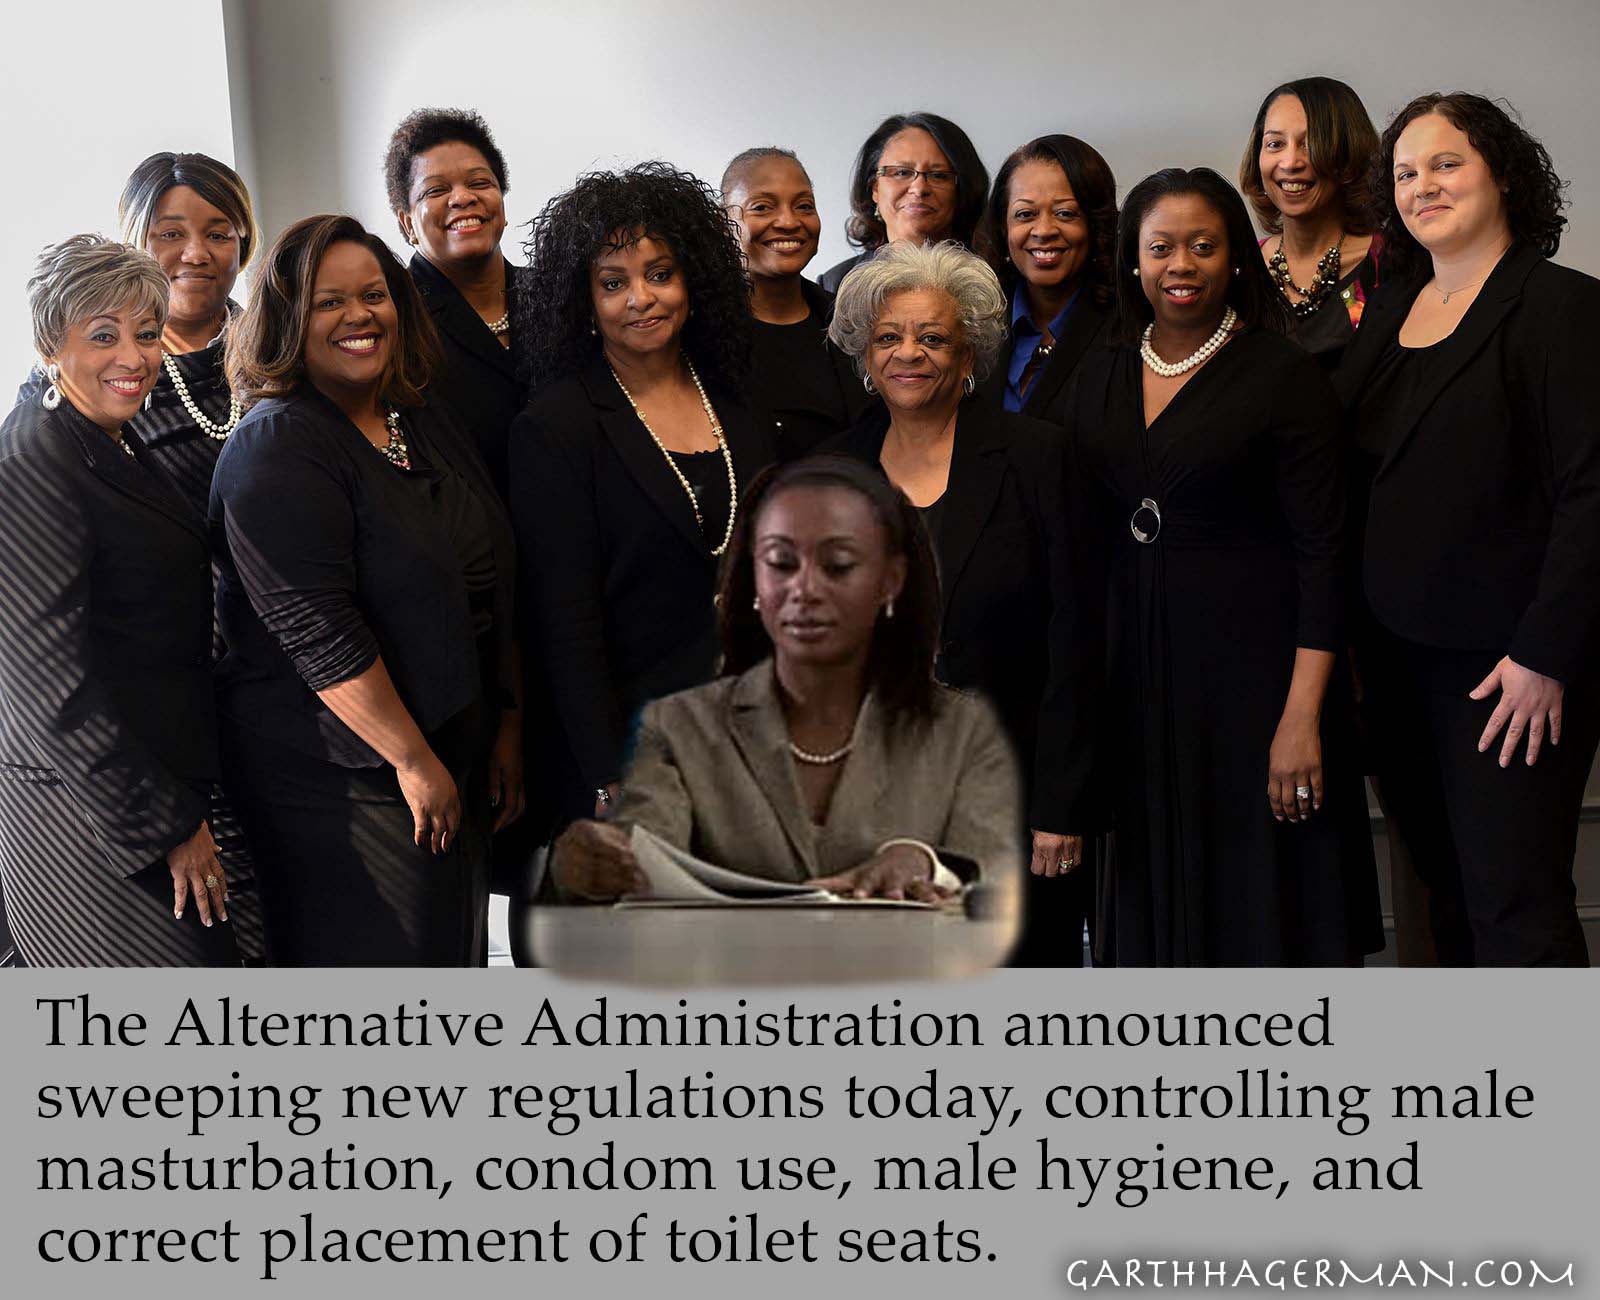 Group of women form alternative administration and regulate male maturbation, hygeine, and toilet seat placement